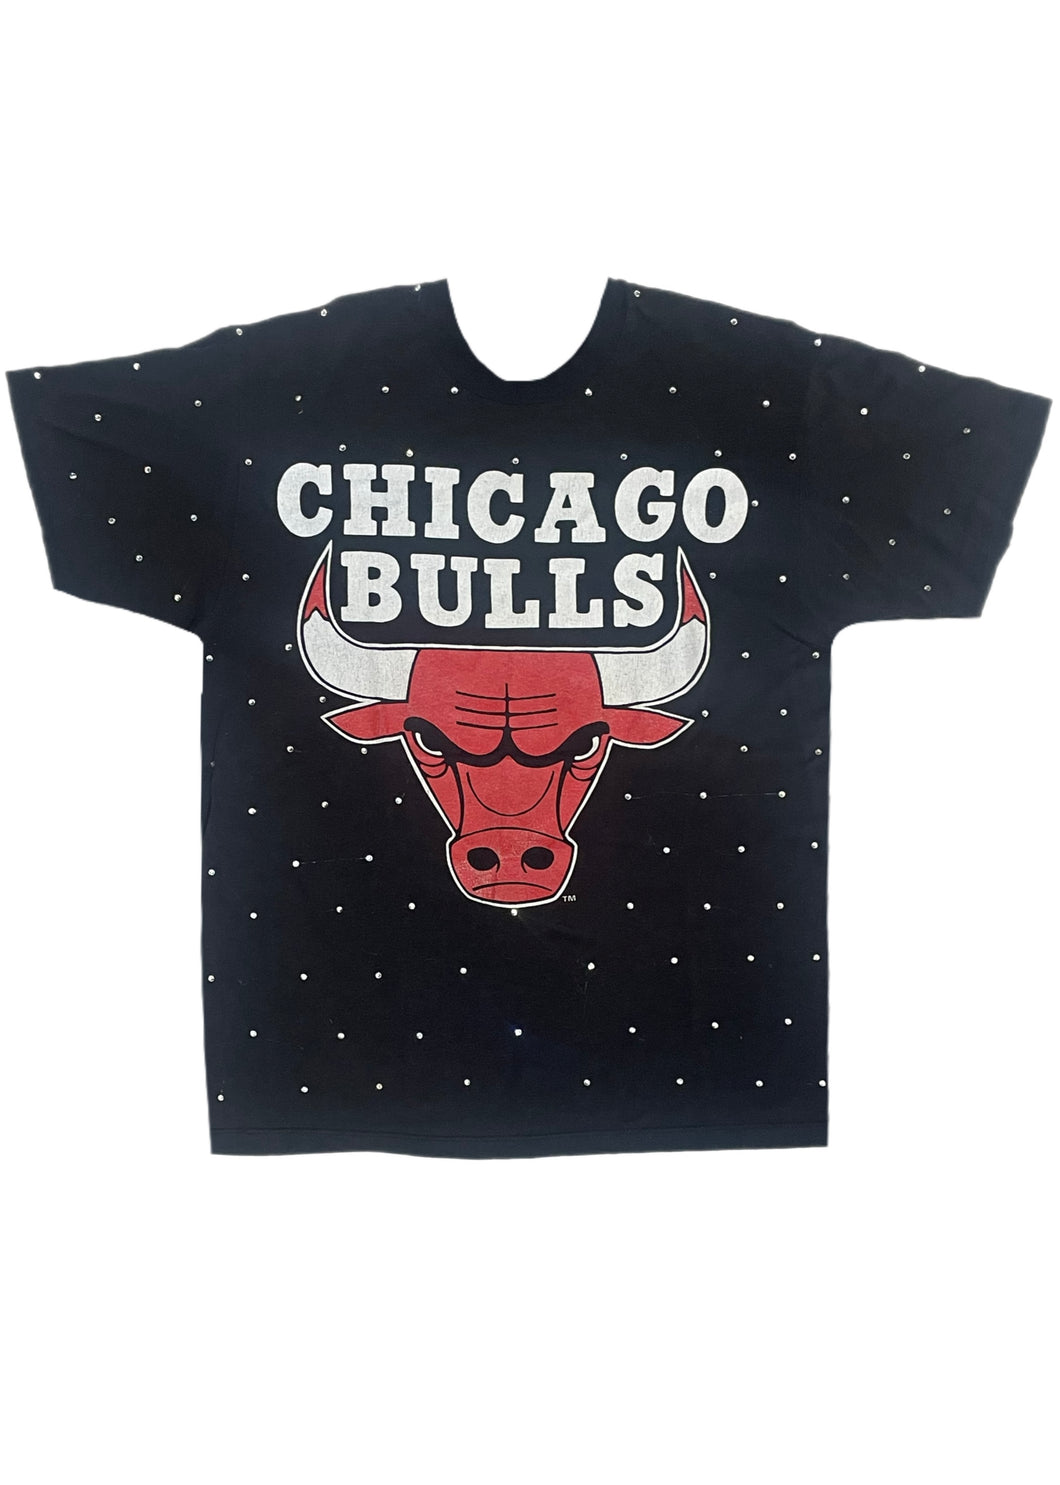 Chicago Bulls, NBA One of a KIND Vintage Tee with Overall Crystal Design